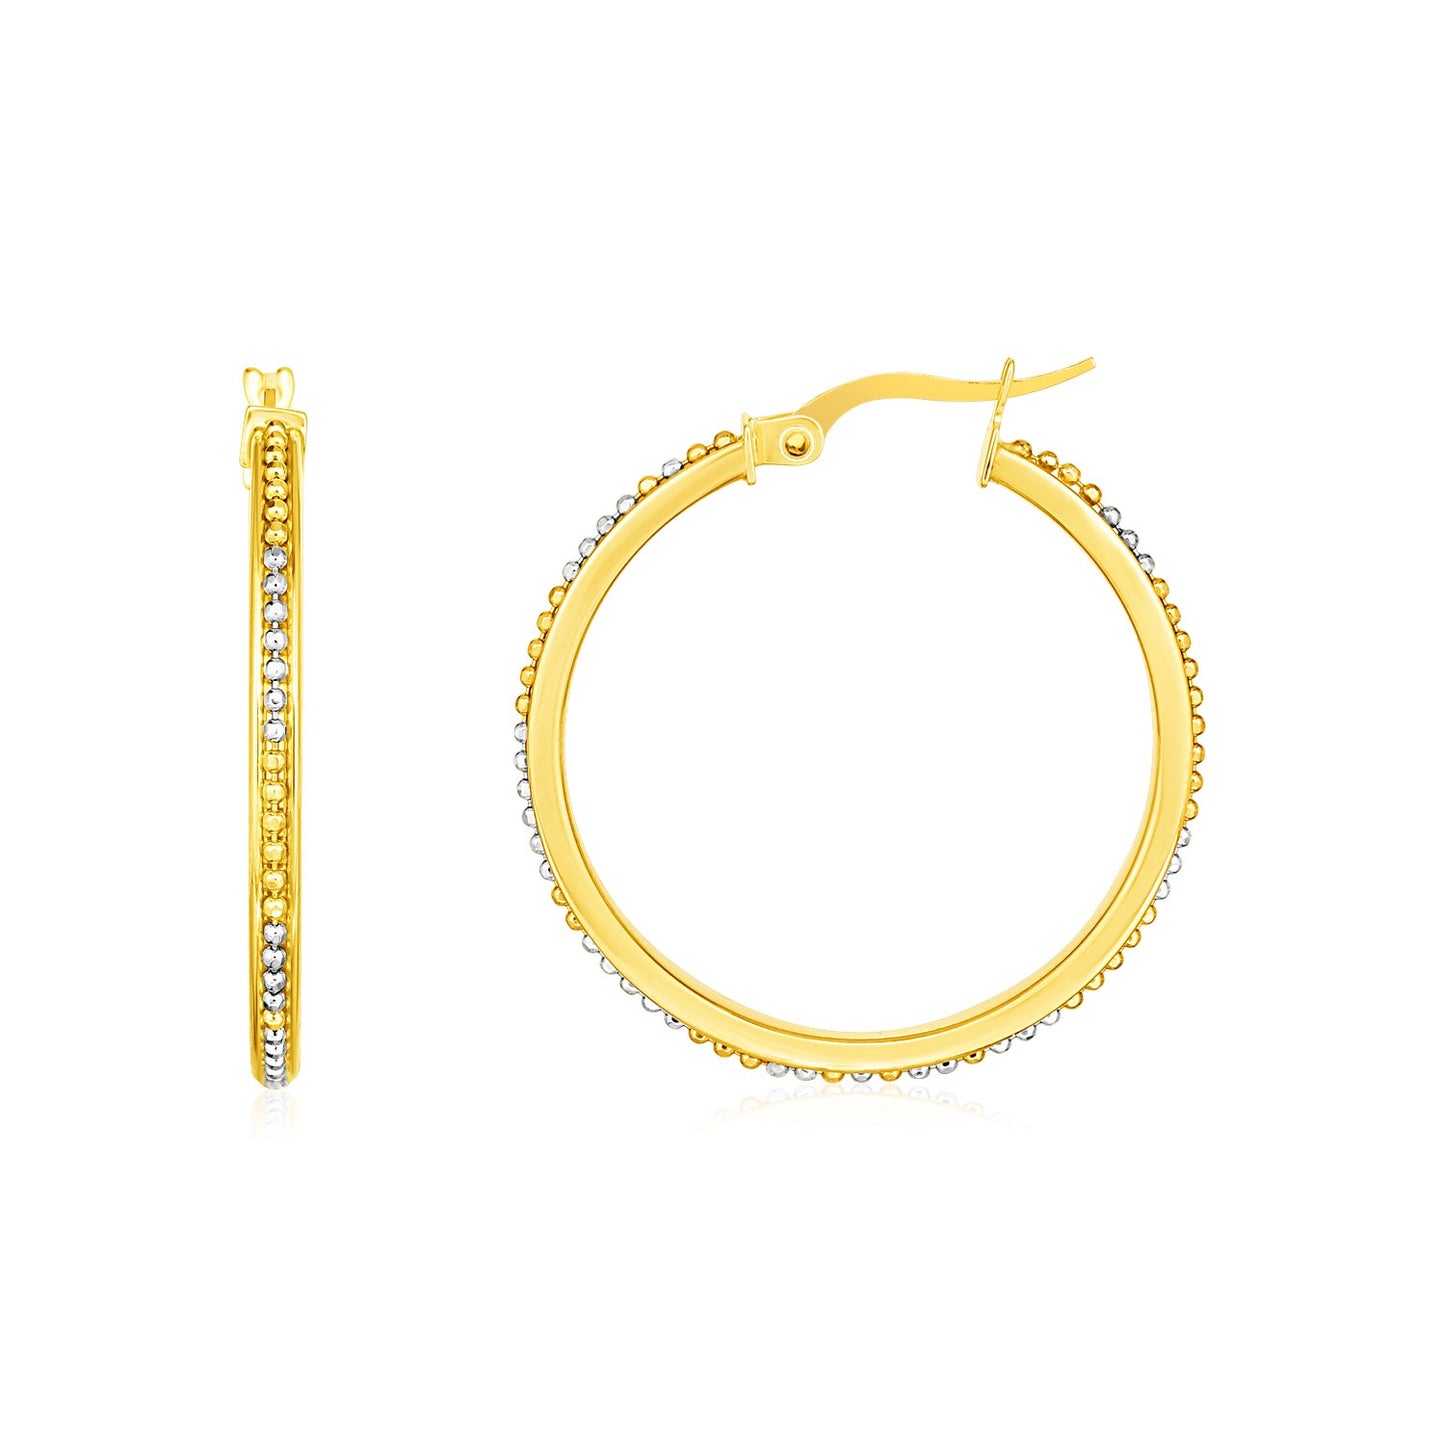 14k Two Tone Gold Round Hoop Earrings with Bead Texture